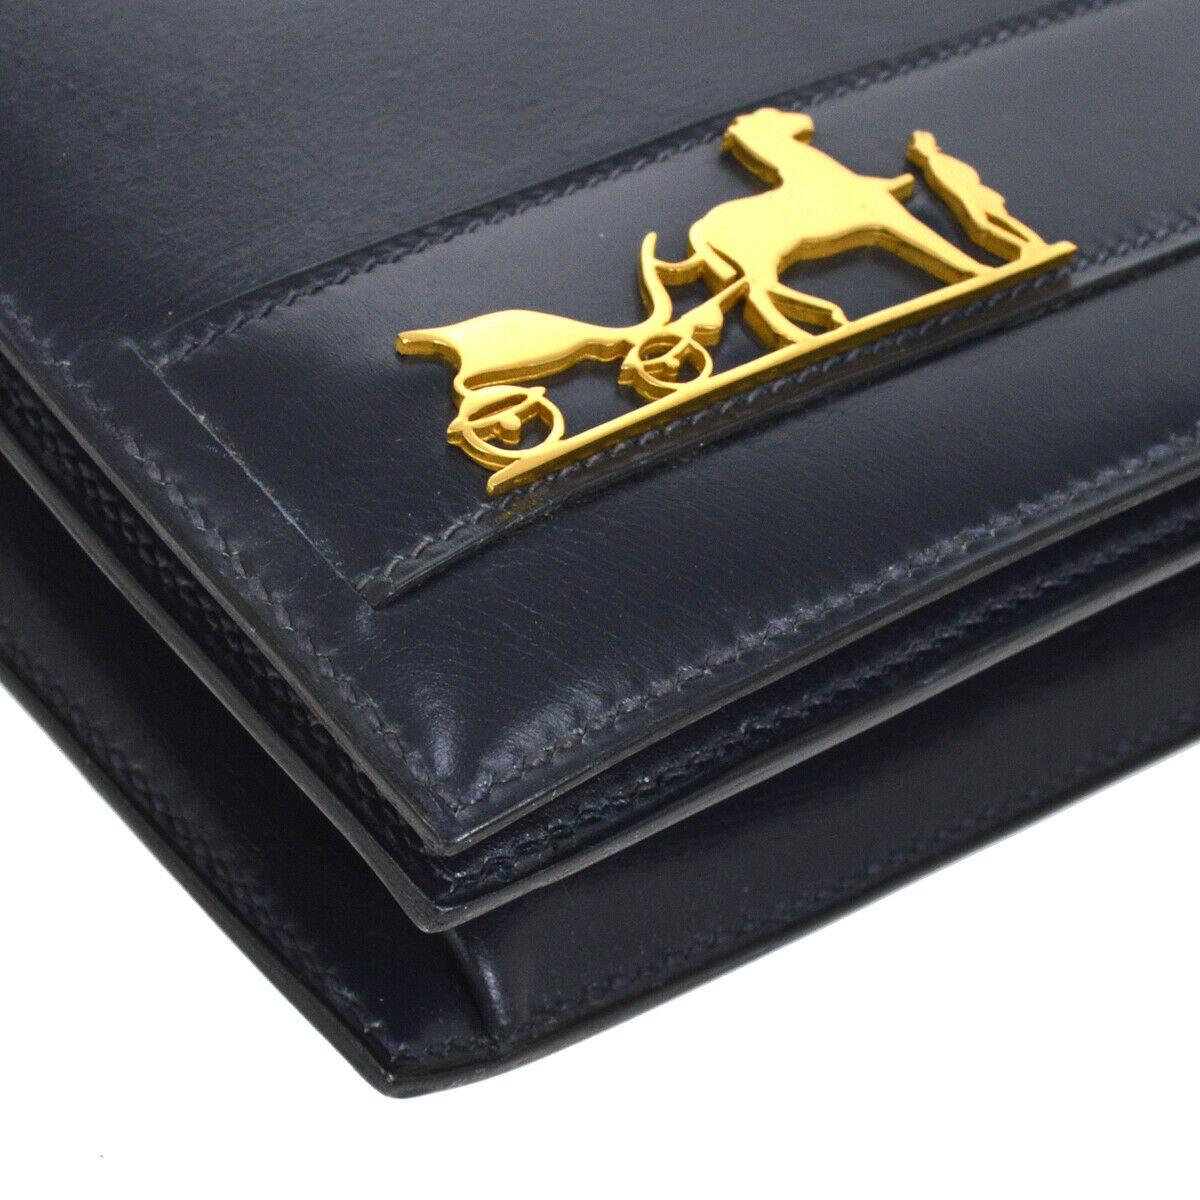 Hermes Dark Blue Navy Leather Horse Gold Emblem Evening Clutch Top Handle Flap Bag

Leather
Gold tone hardware
Leather lining
Made in France
Date code present
Handle drop 1.5